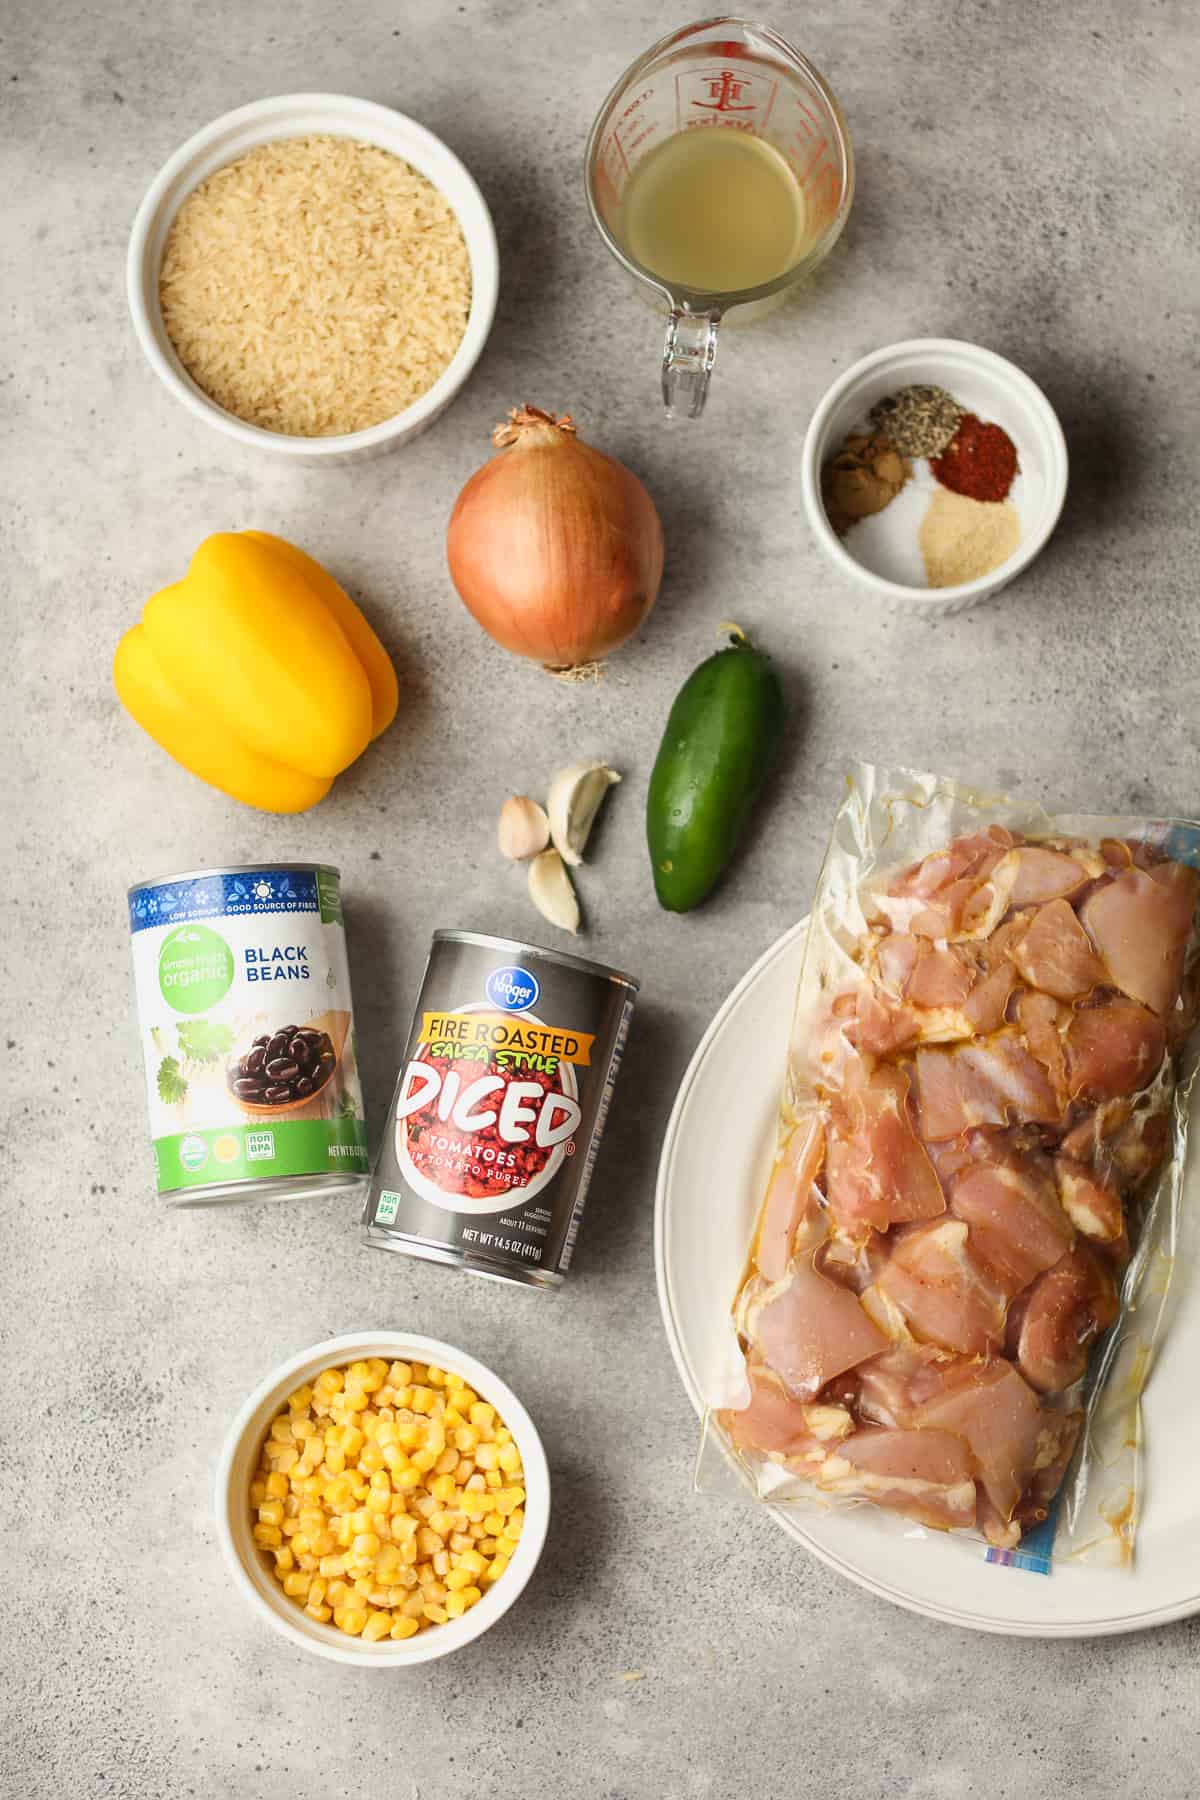 The ingredients for the Southern Chicken and Rice.